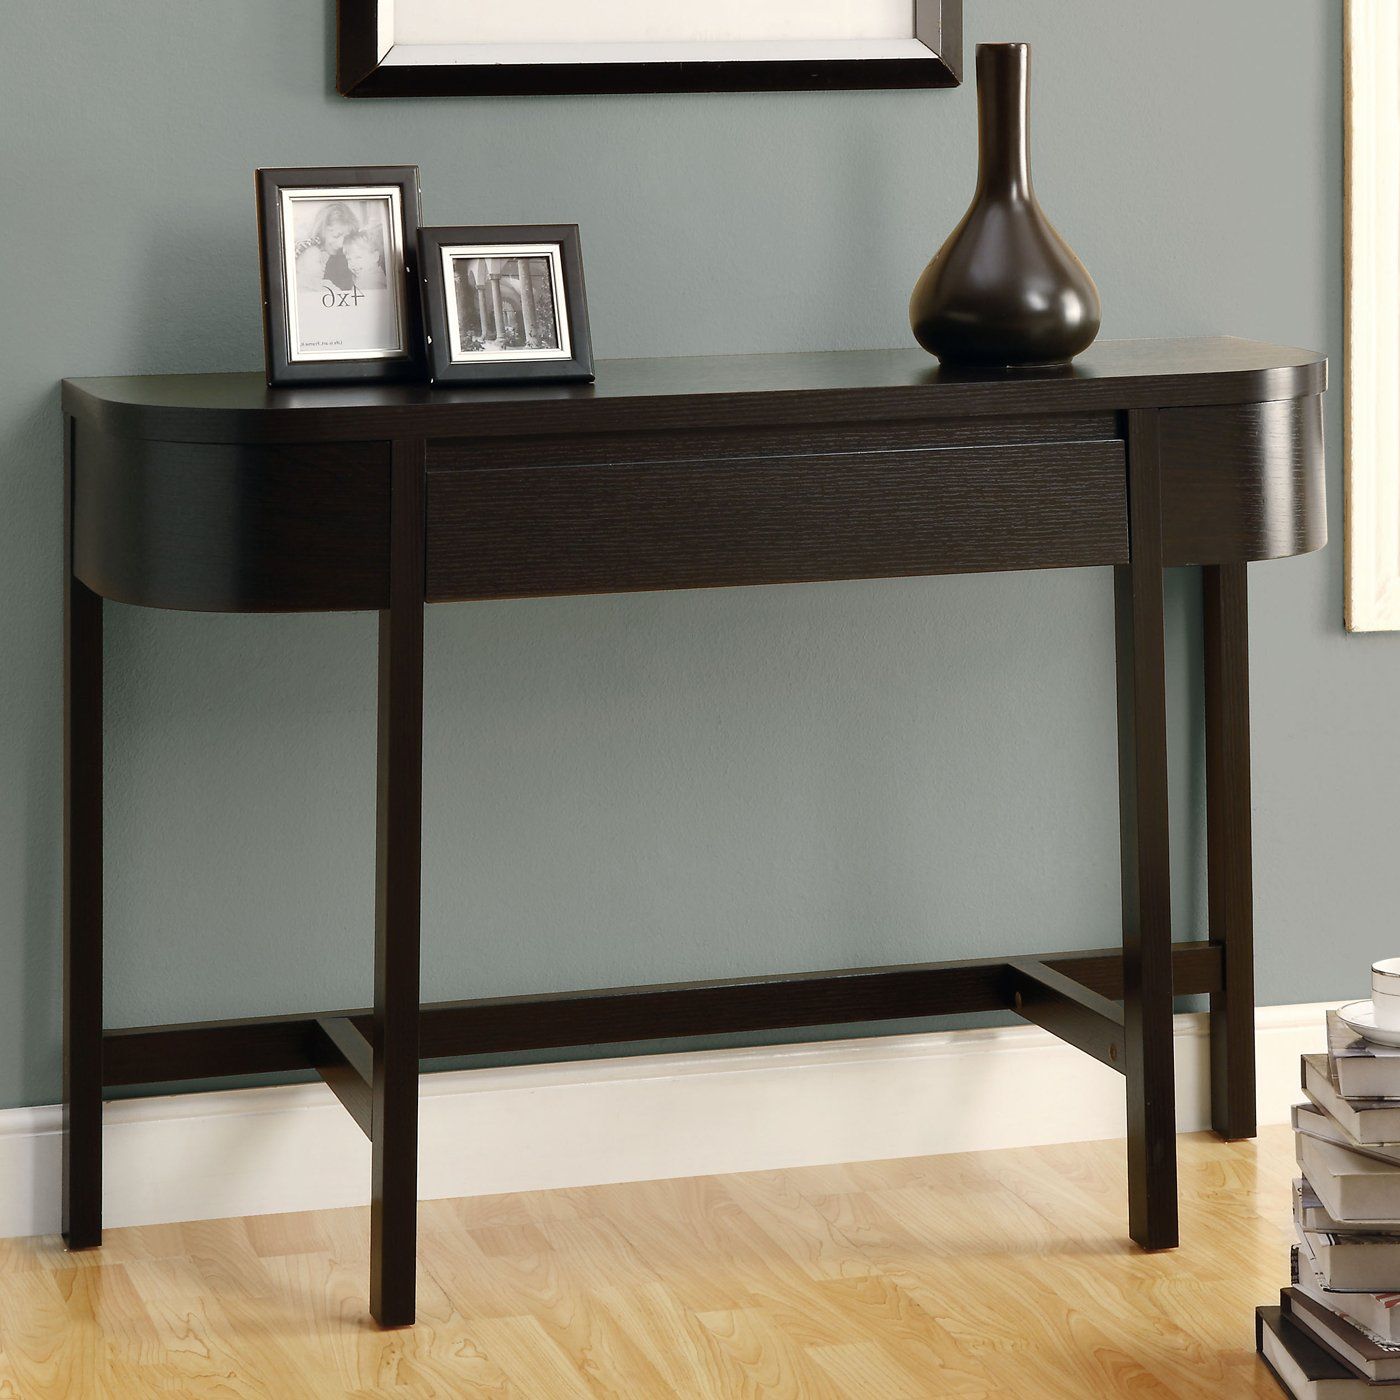 Slim Console Tables That Will Add The Sophistication Of Inside Square Modern Console Tables (Photo 8 of 20)